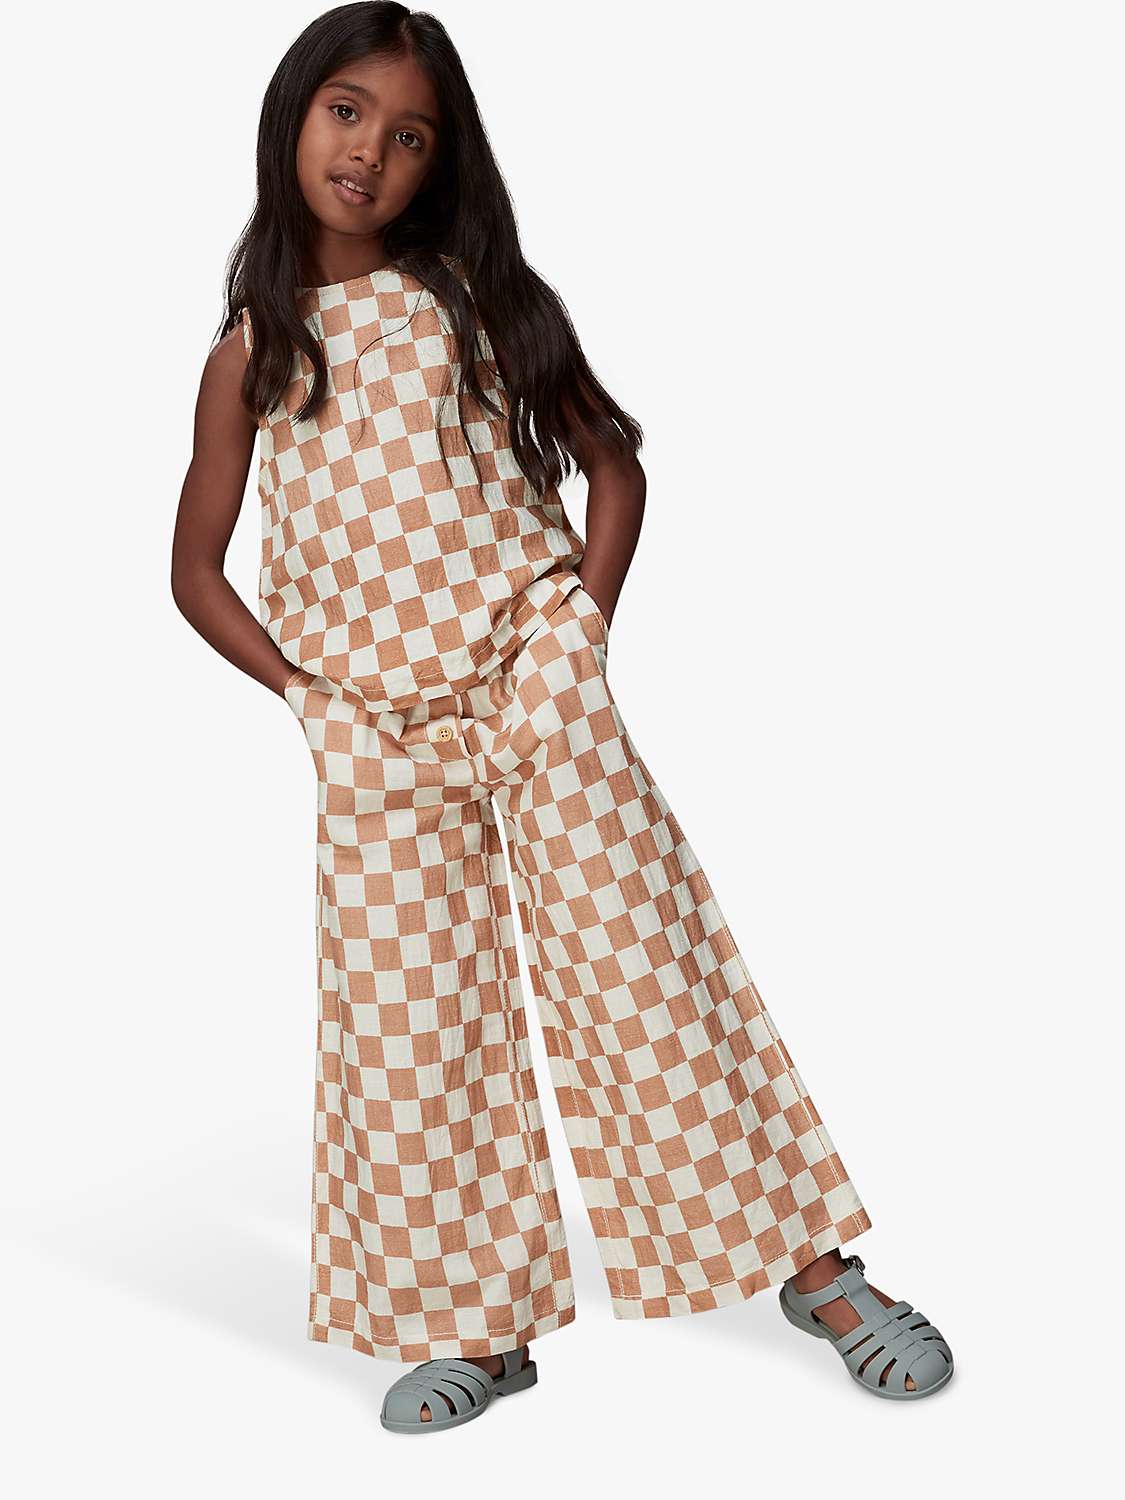 Buy Whistles Kids' Linen Blend Checkerboard Wide Leg Trousers, Multi Online at johnlewis.com